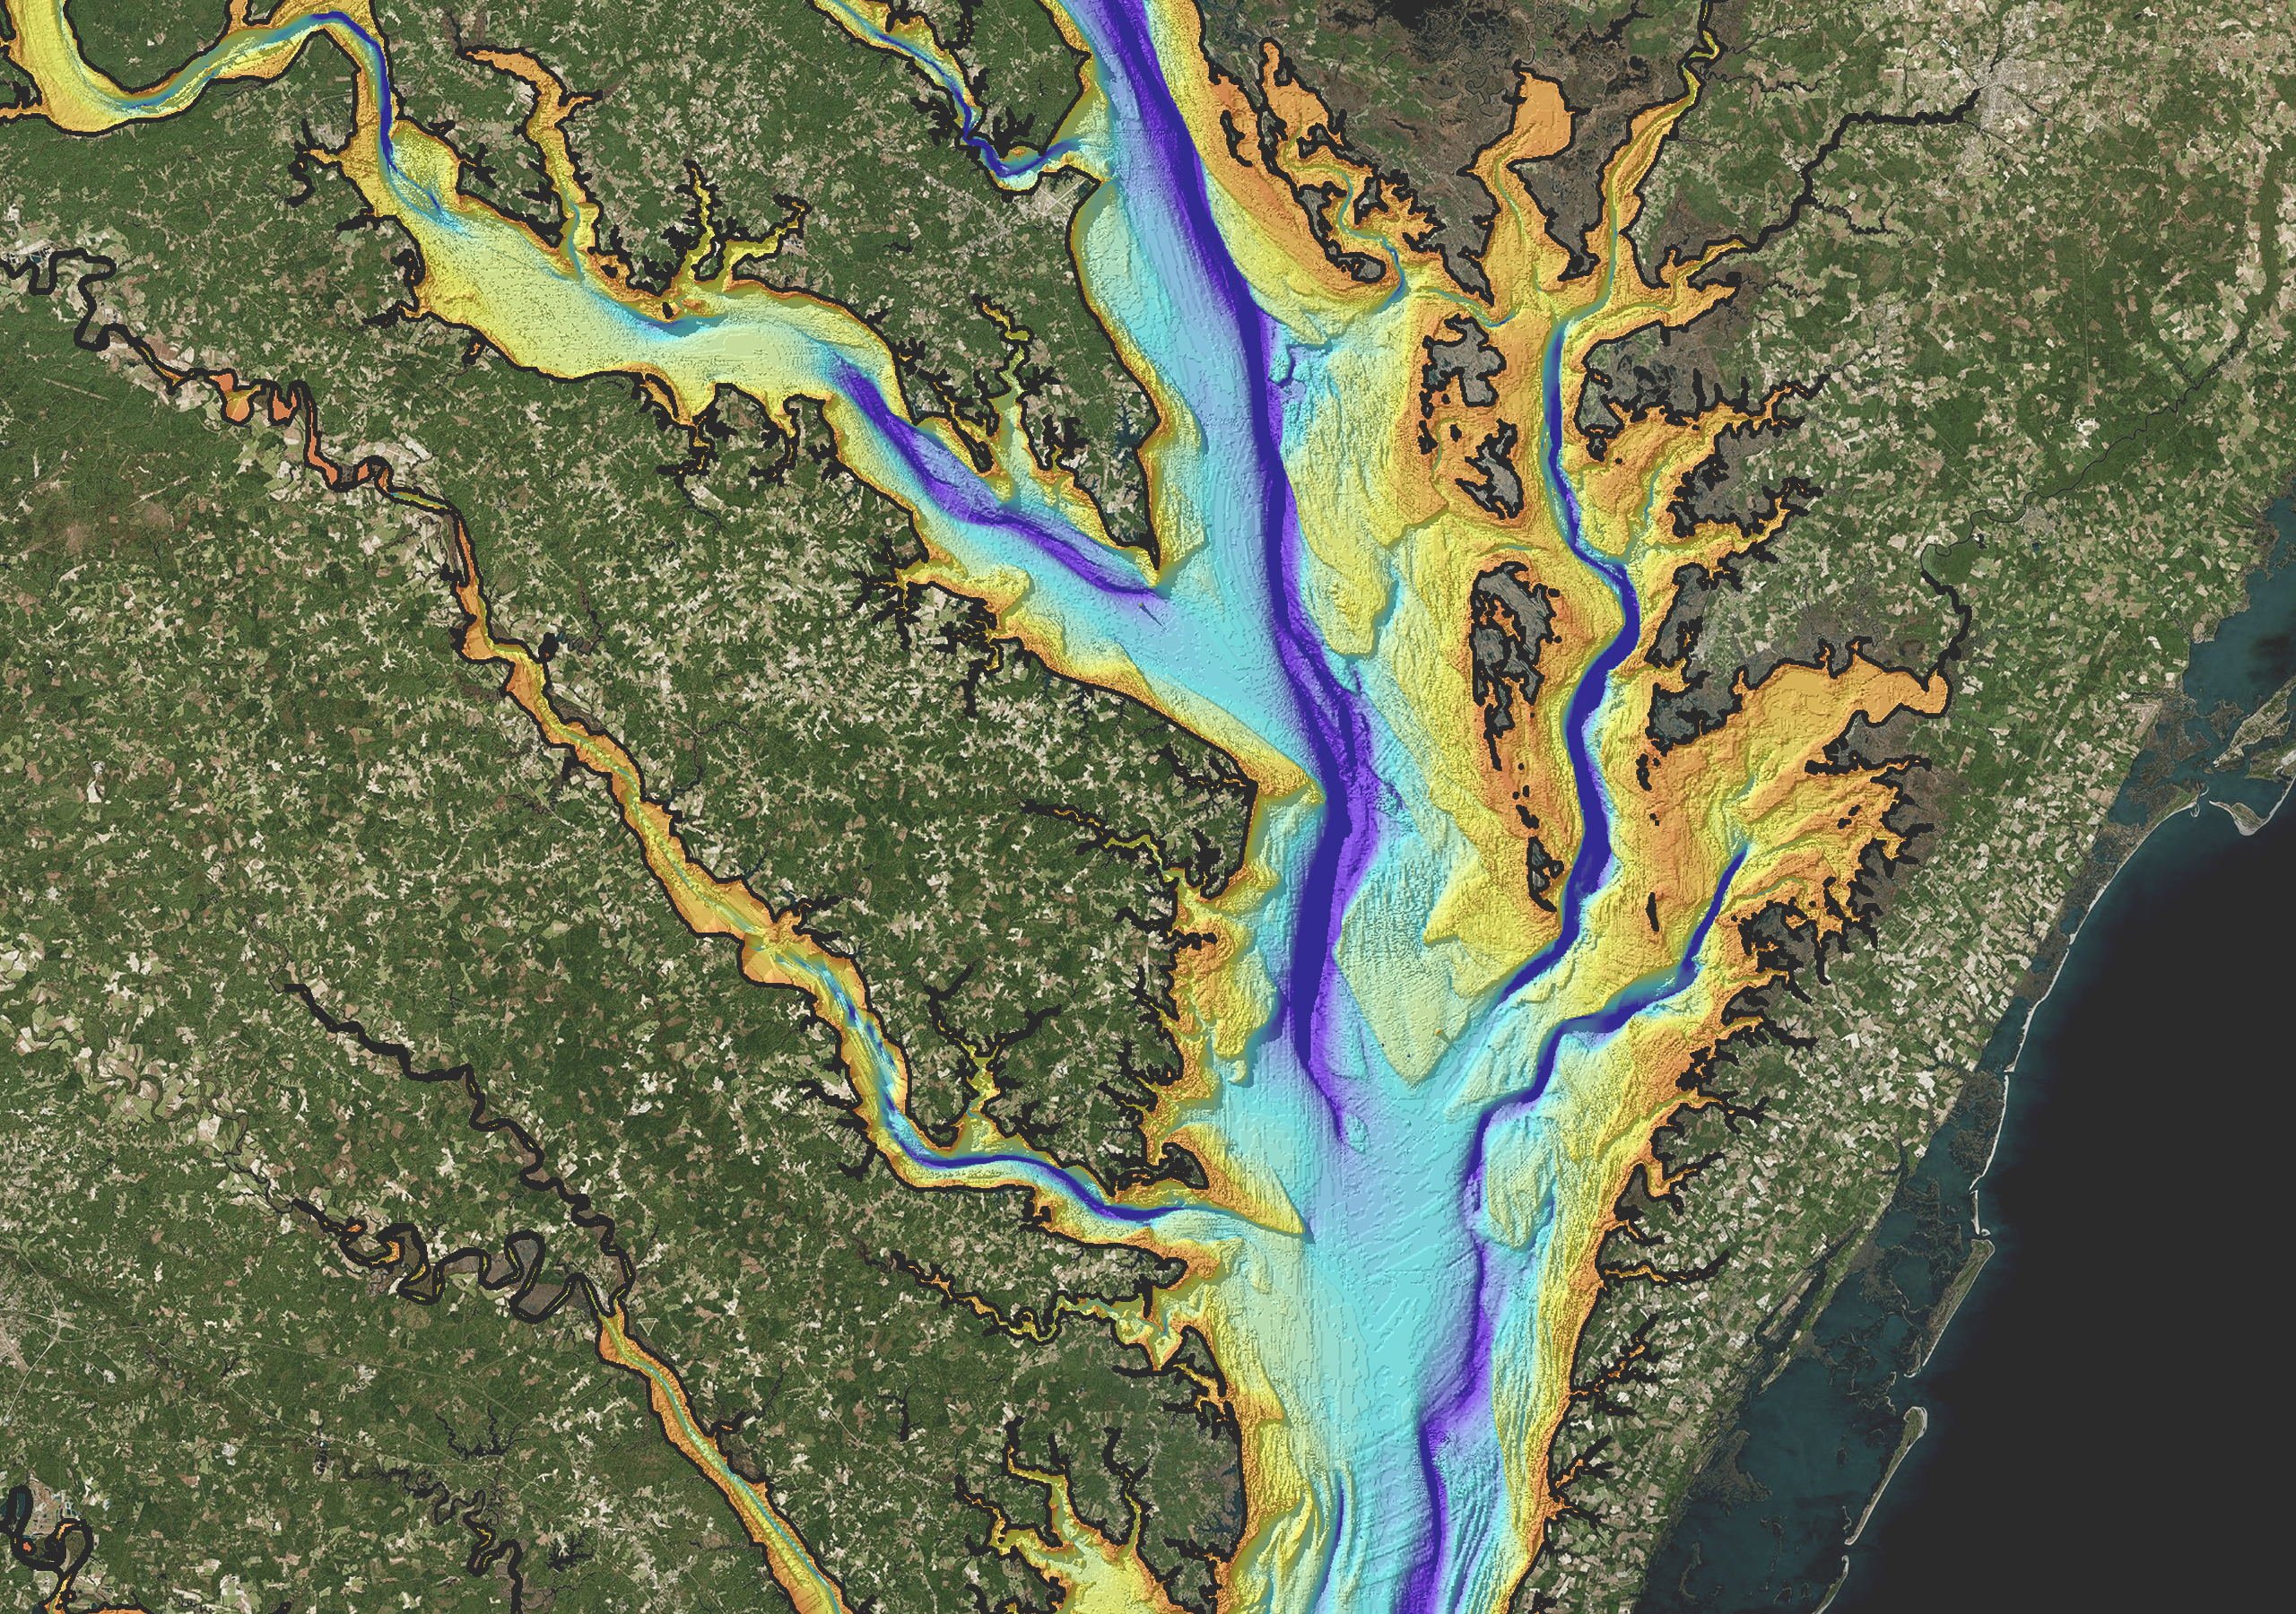 A remote sensing image of a river shows a gradient of dark blue, light blue, yellow, and orange indicating water flow